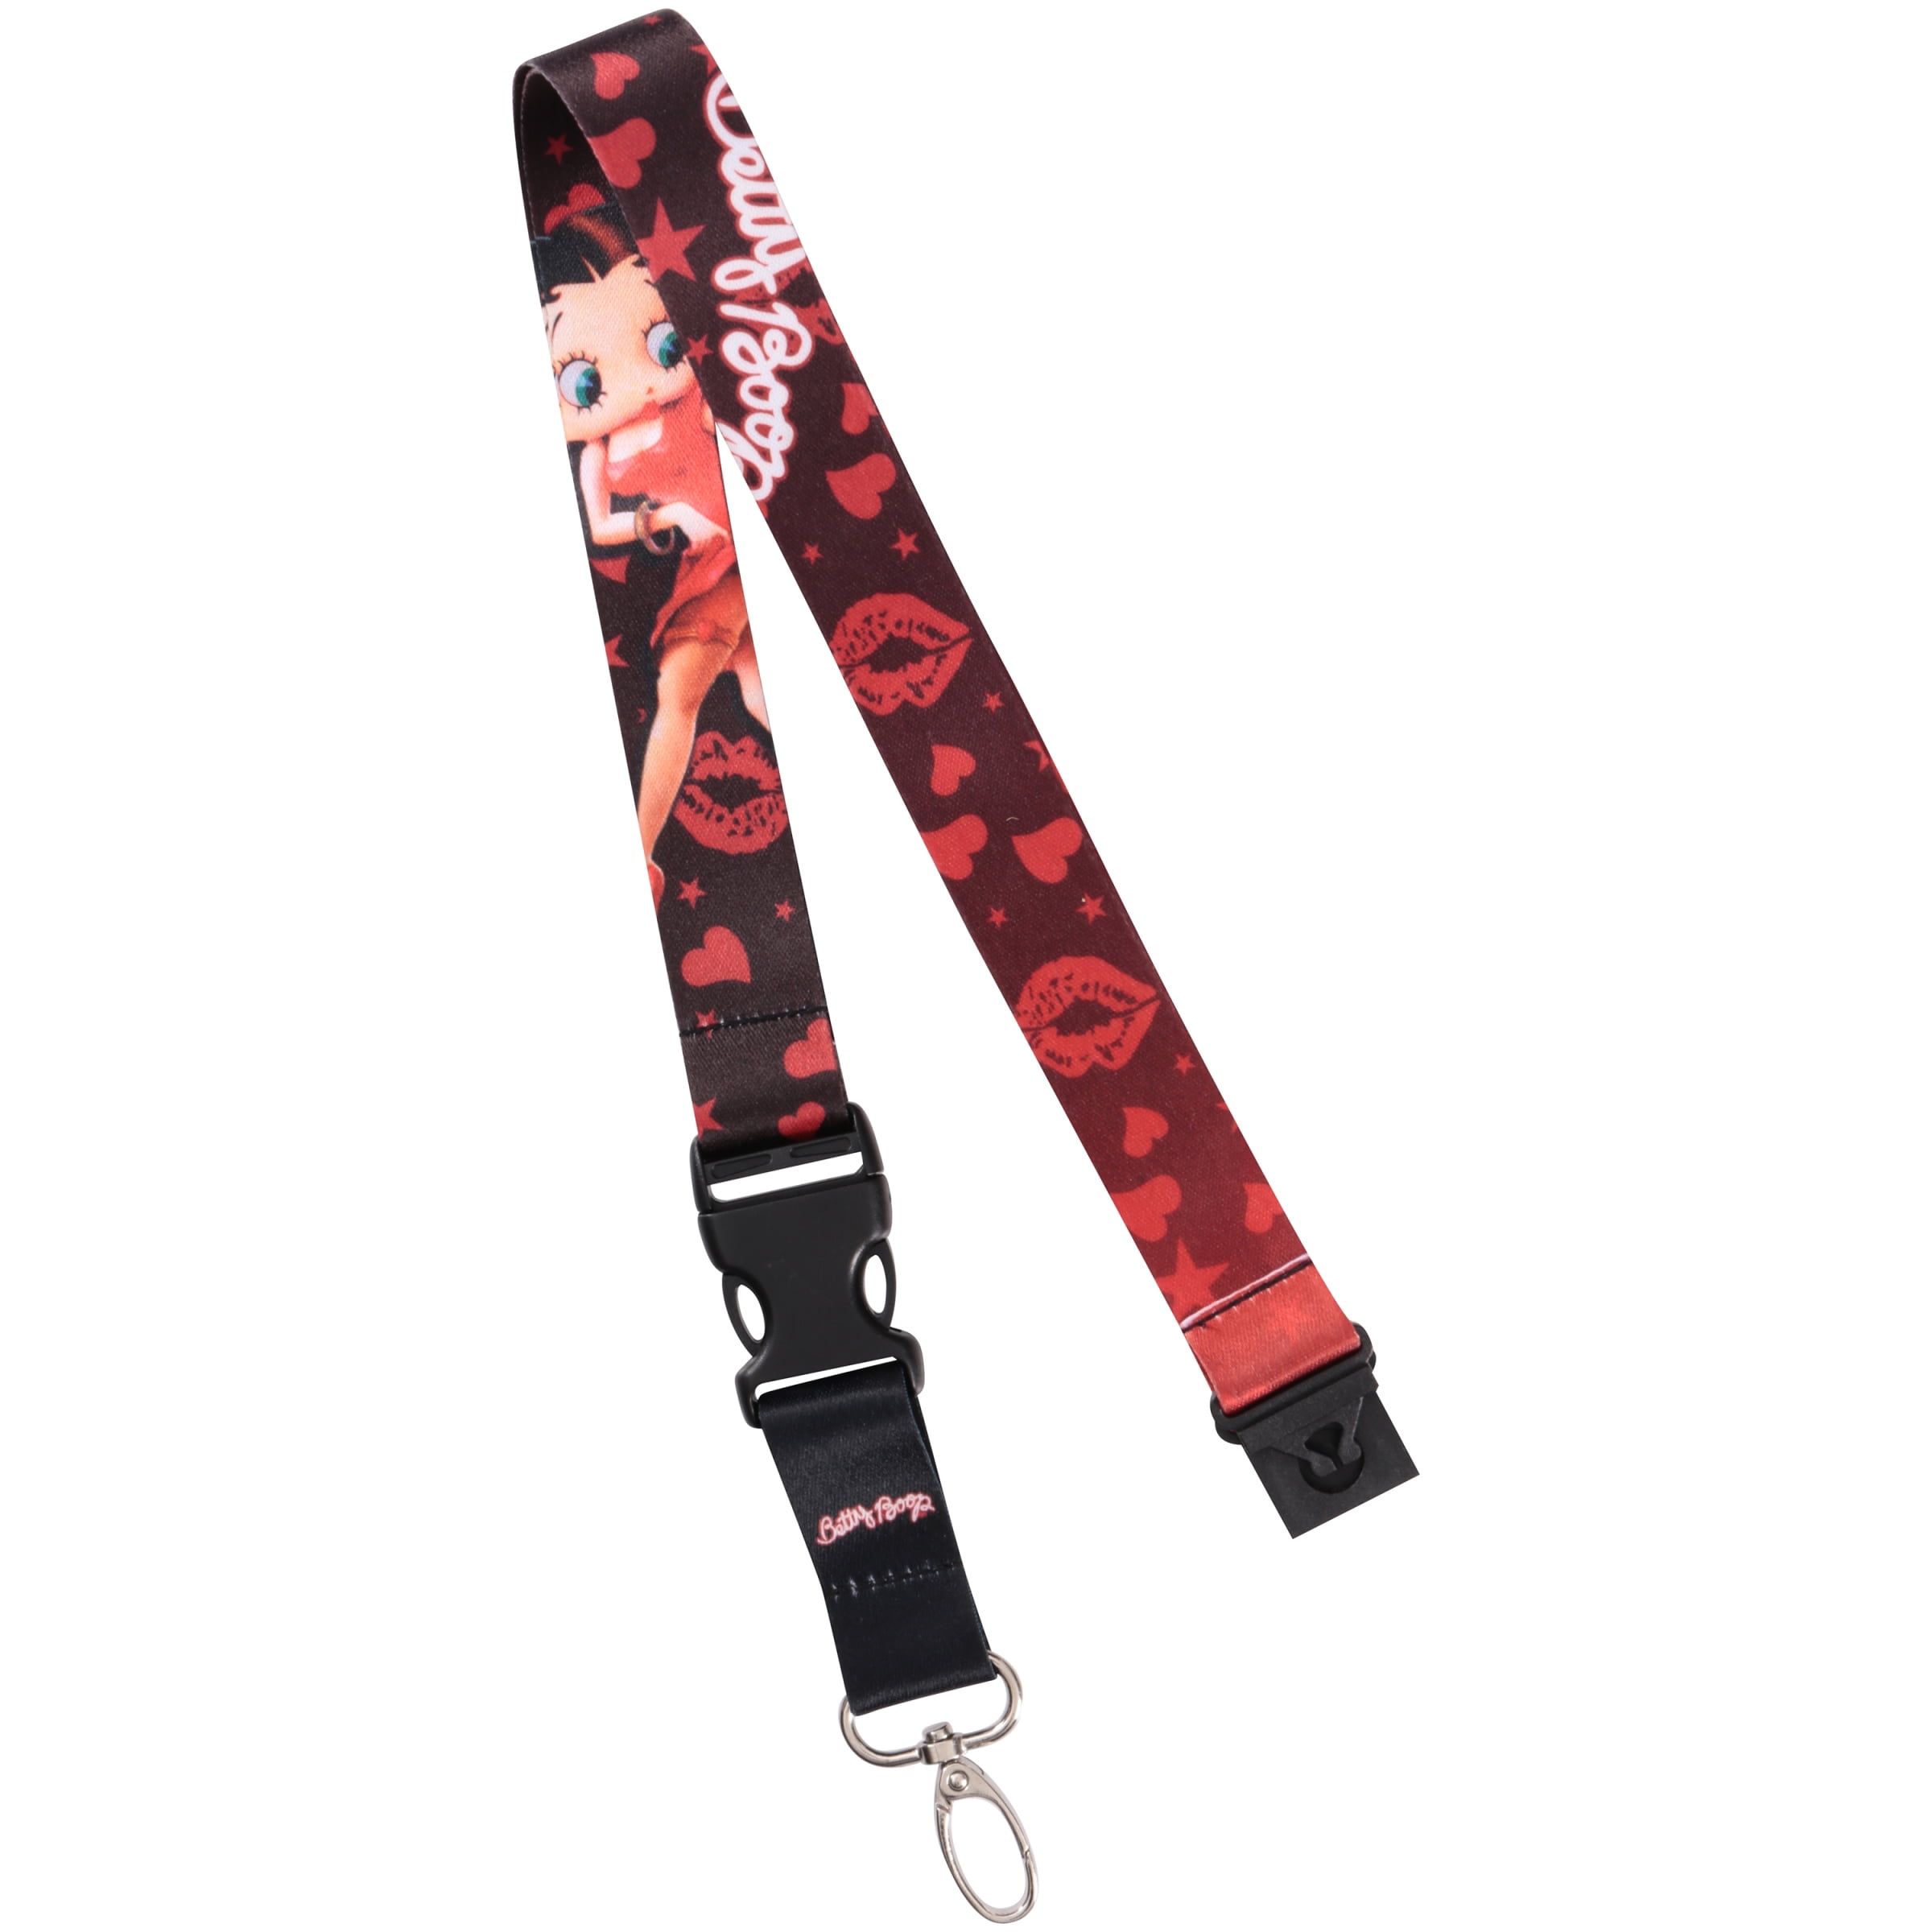 from 3 Betty Boop Lanyards Send Message Choose ONE 